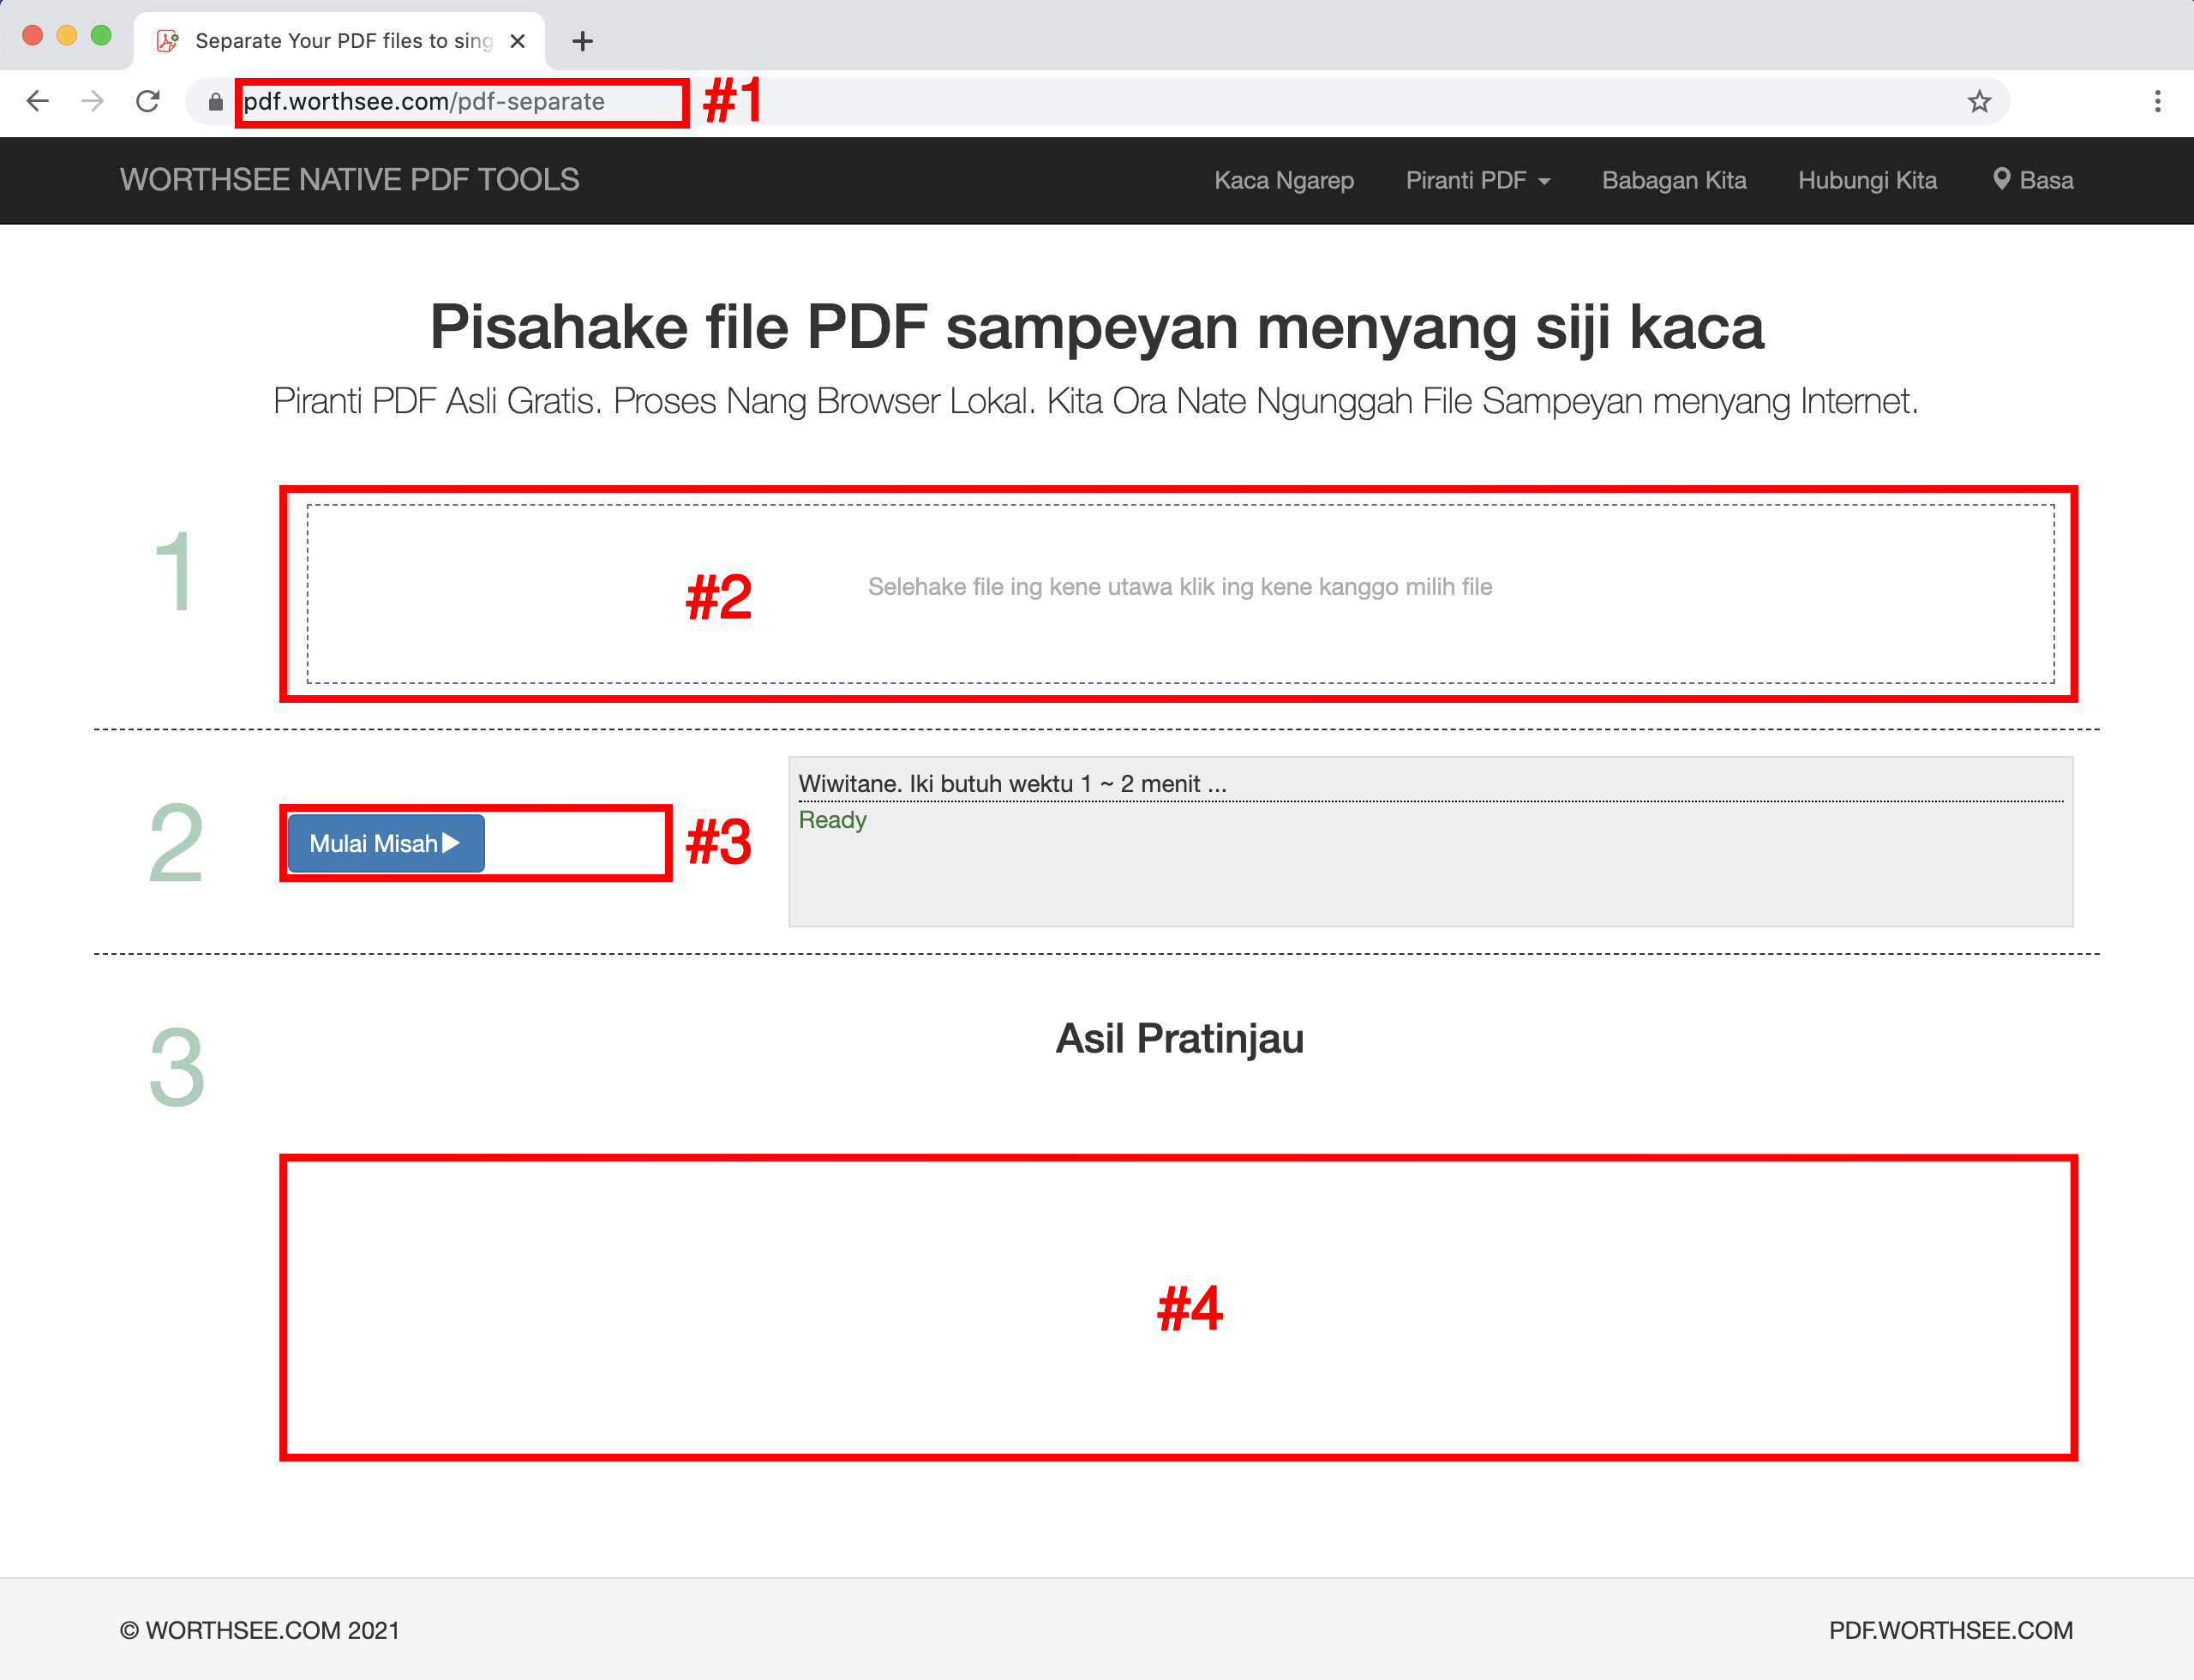 Tutorial image for pdf separate by page